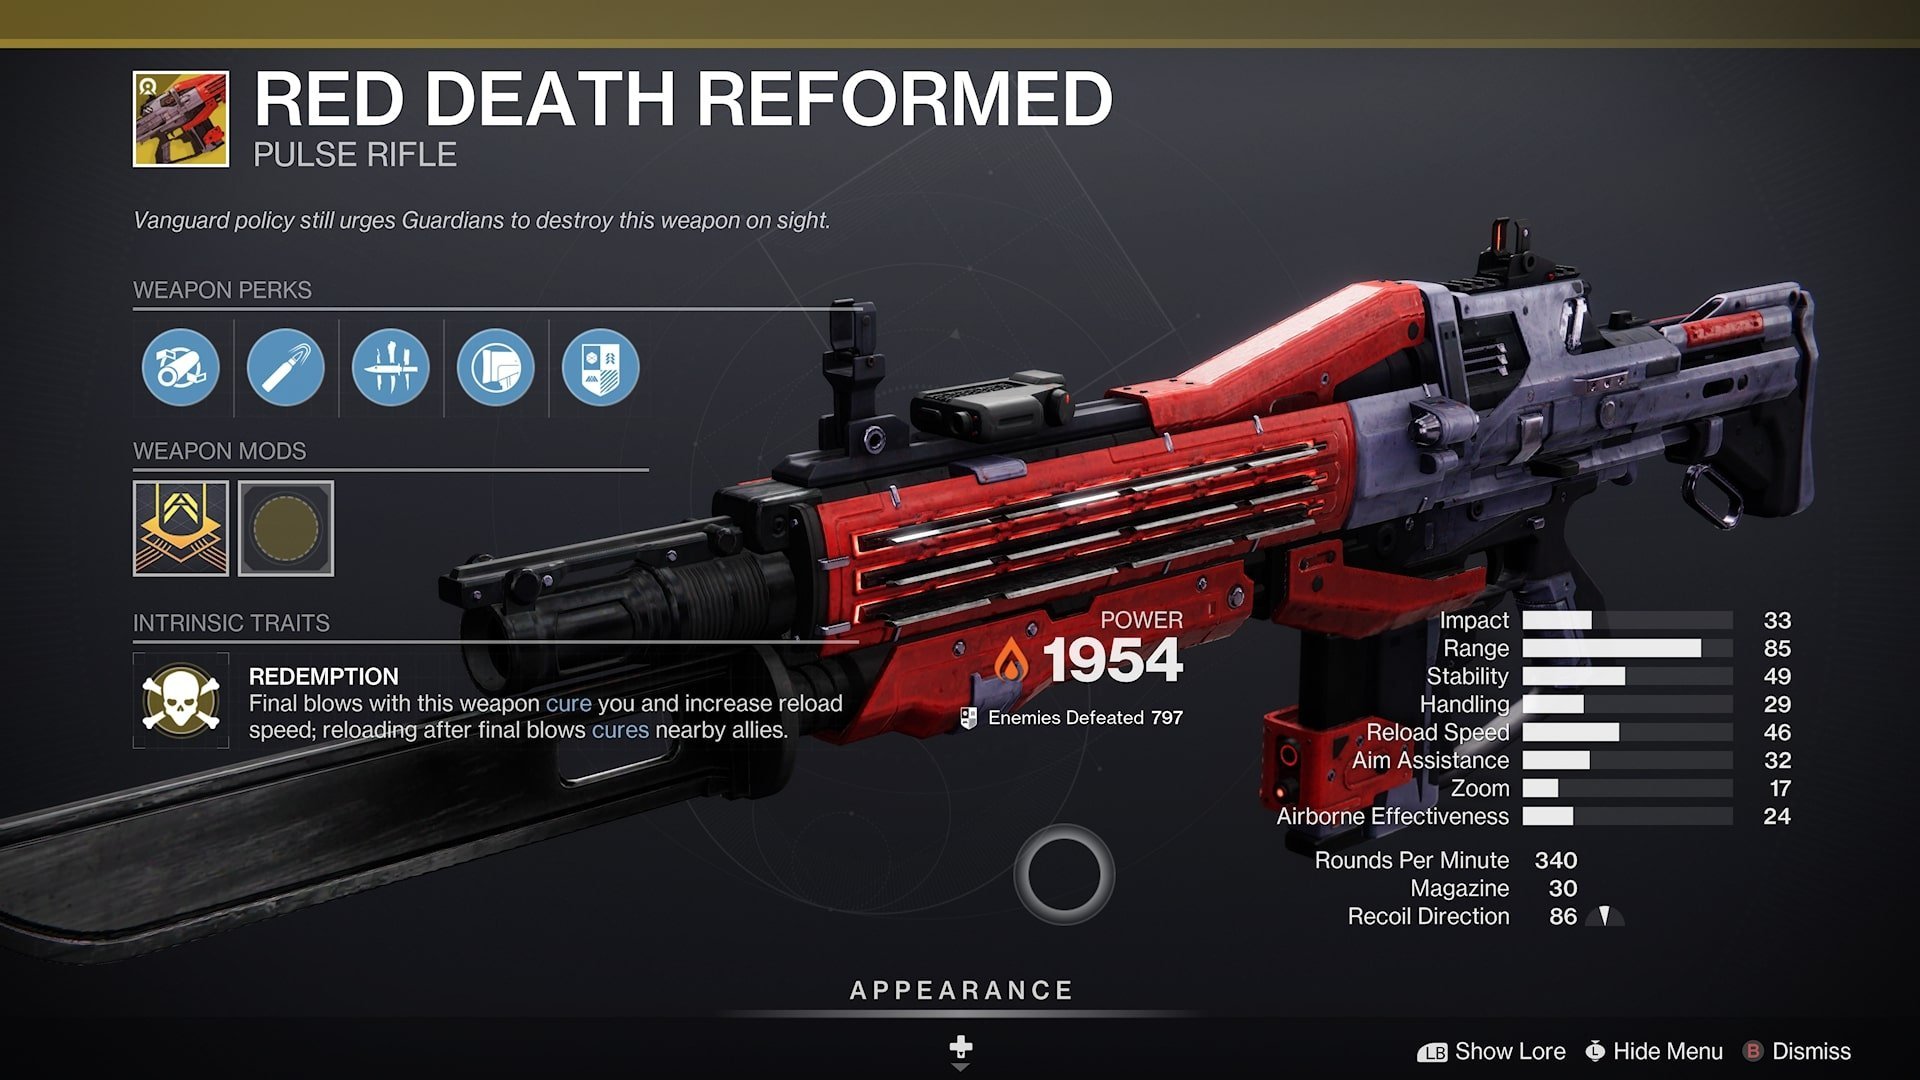 Red Death Reformed Pulse rifle